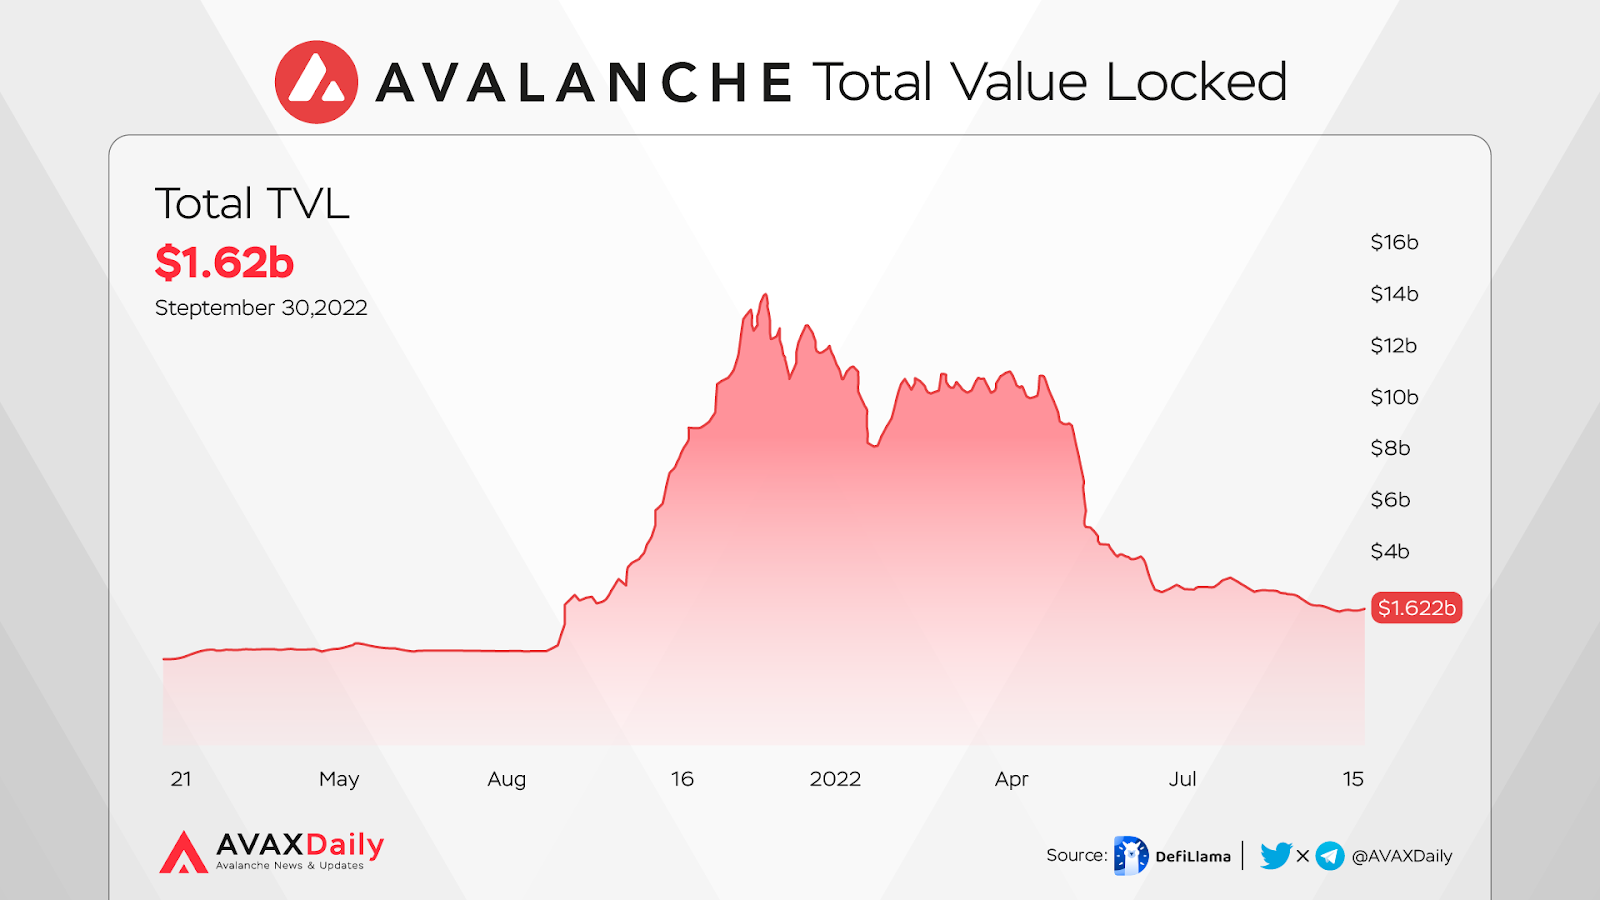 Avalanche Total Value Locked